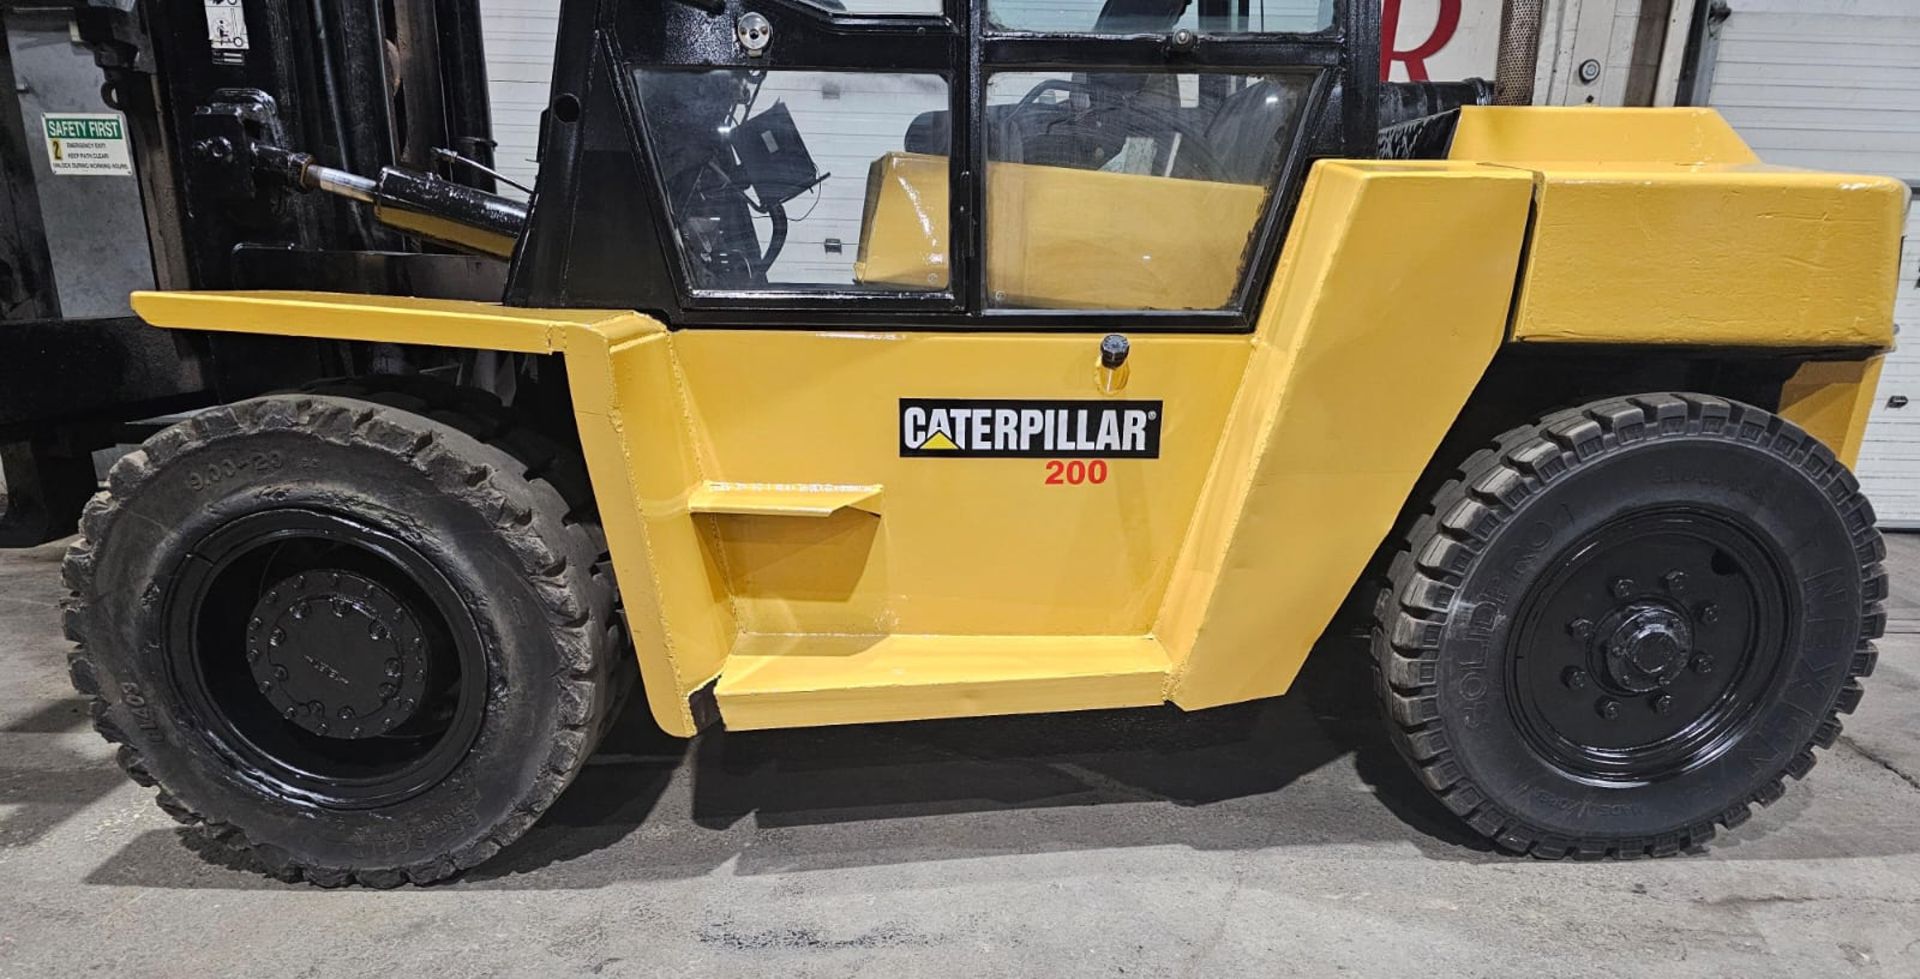 CATERPILLAR 20,000lbs Capacity LPG (Propane) OUTDOOR Forklift with 72" Forks & 146" load height with - Image 2 of 9